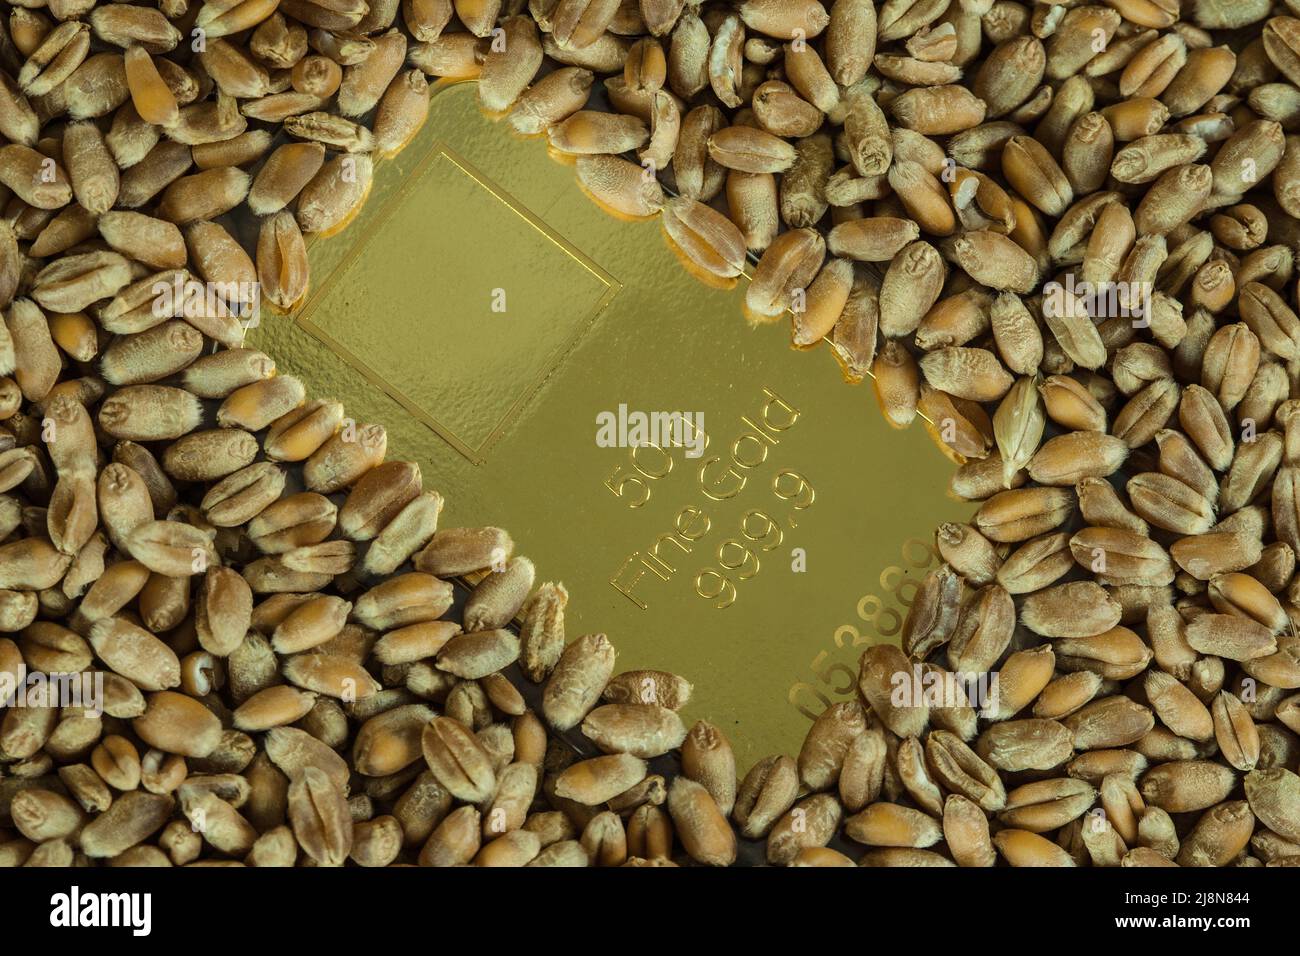 Grain is the new gold of the future. Stock Photo